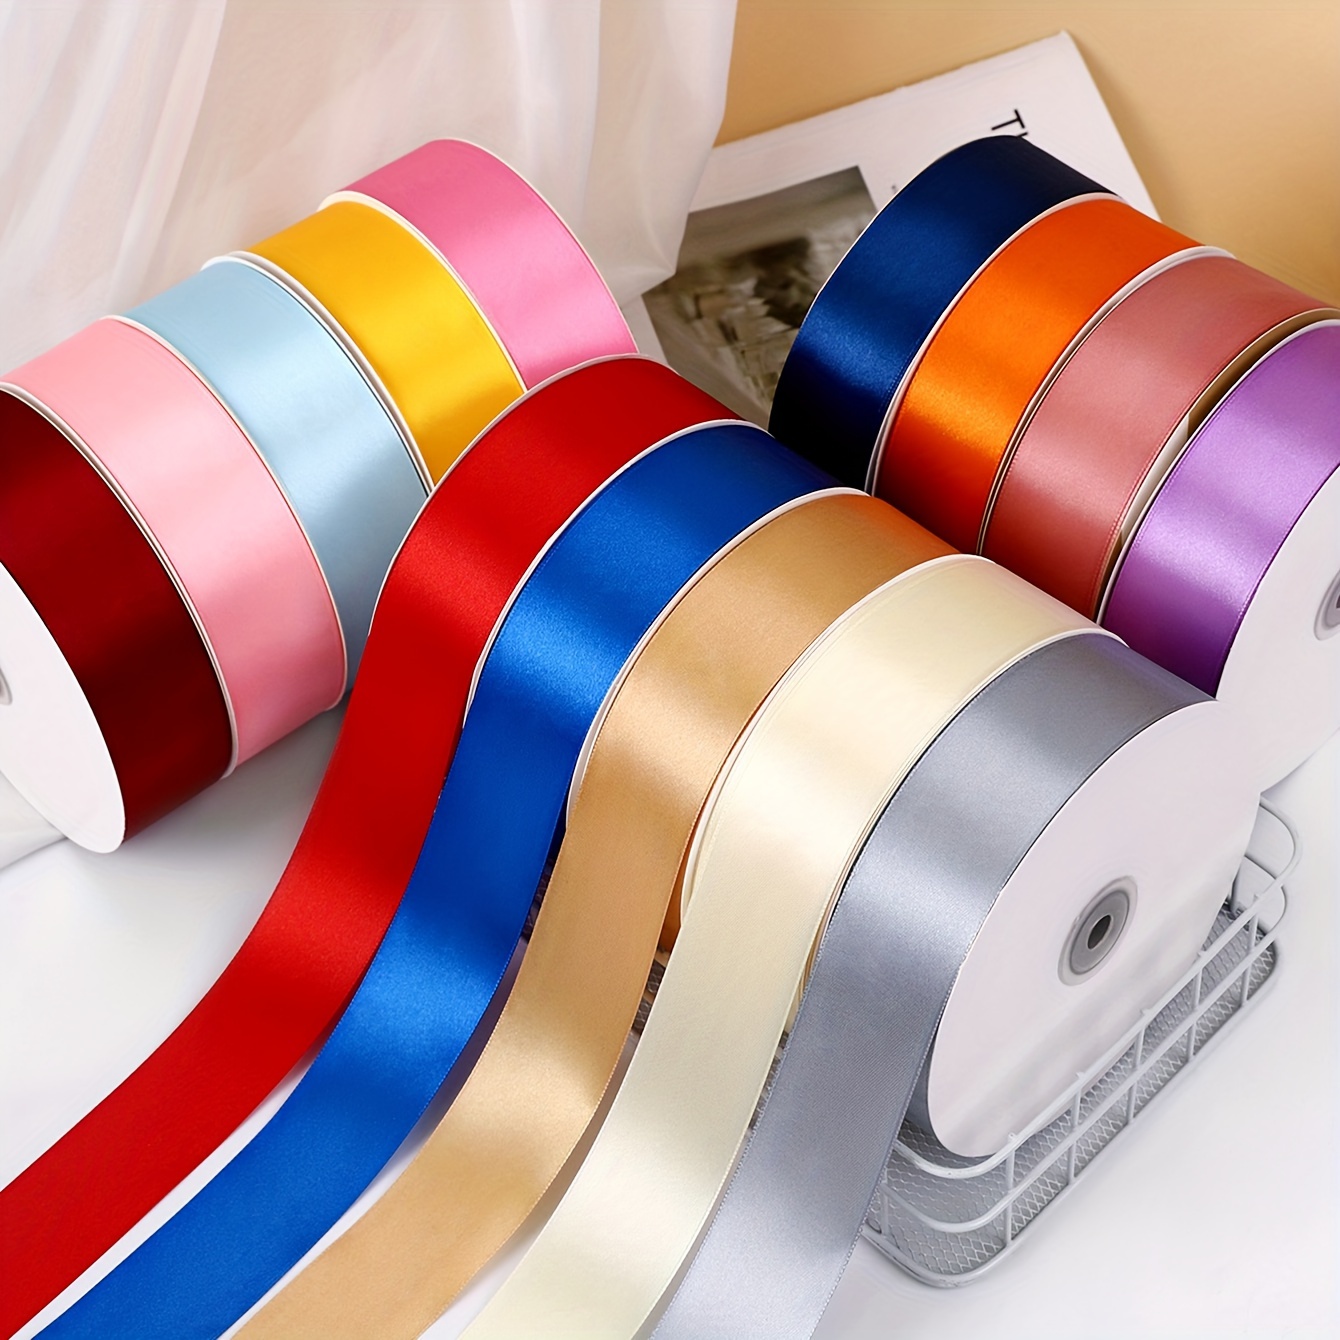 

elegant Shine" 100 Yards Of 1.57" Wide Solid Color Polyester Satin Ribbon - Perfect For Diy Rose Bouquets, Hair Bows, Gift Wrapping & Party Decorations